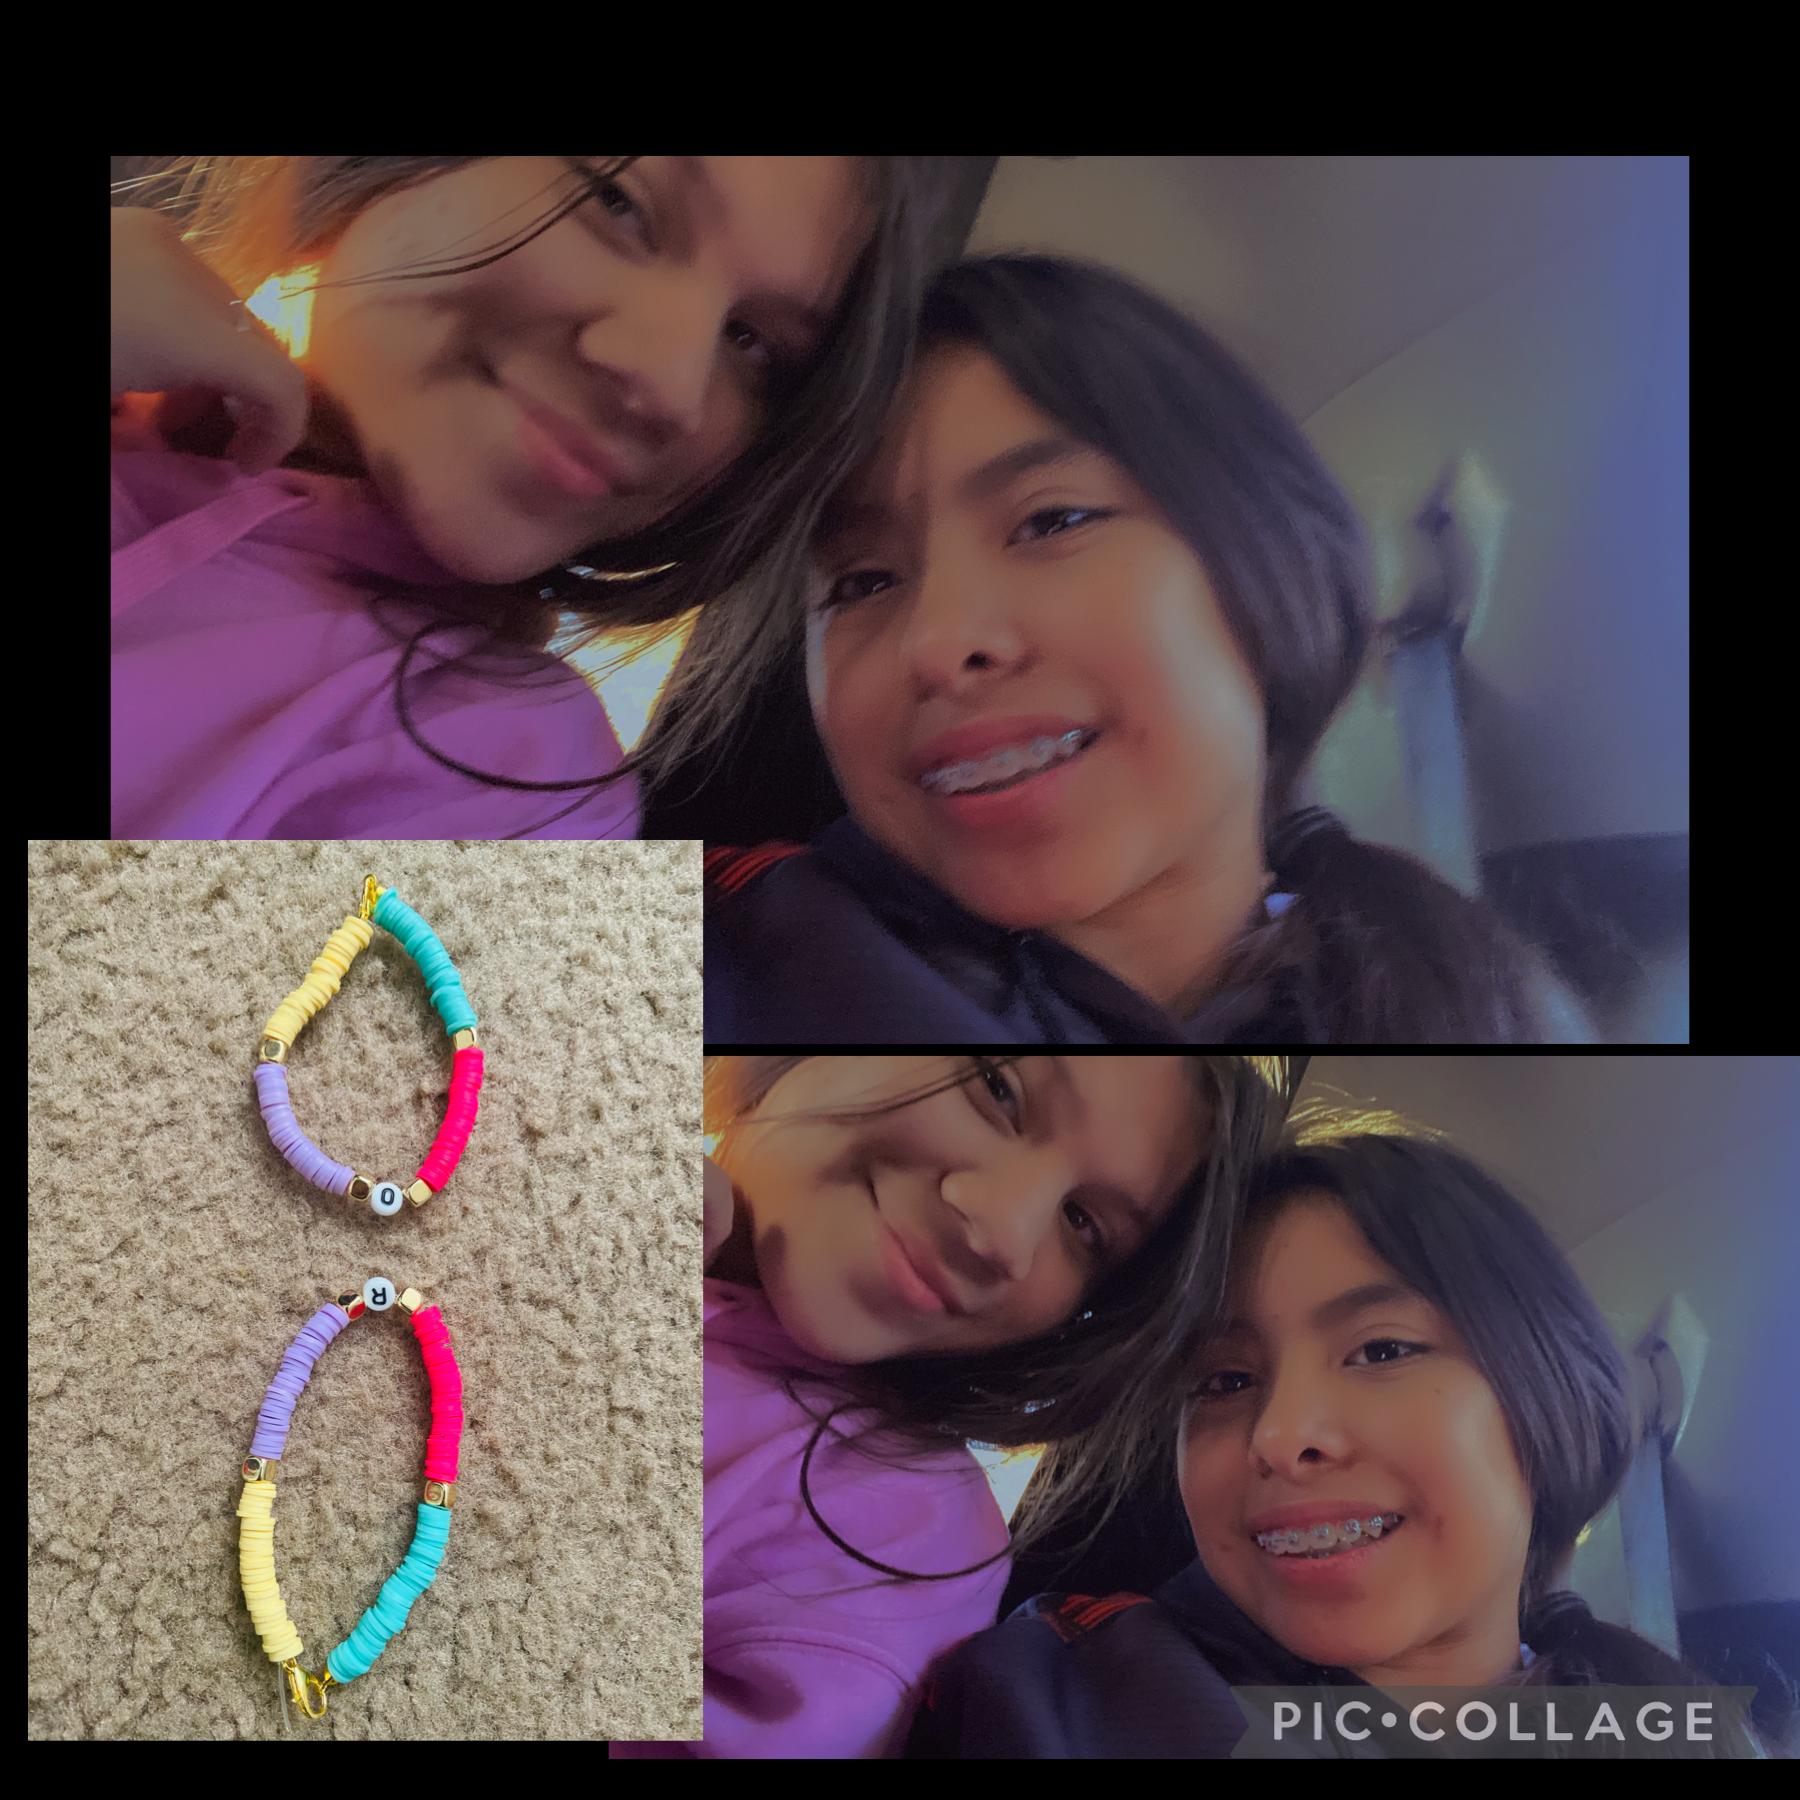 Went to my bsf house today we had fun and we made clay bead braclets